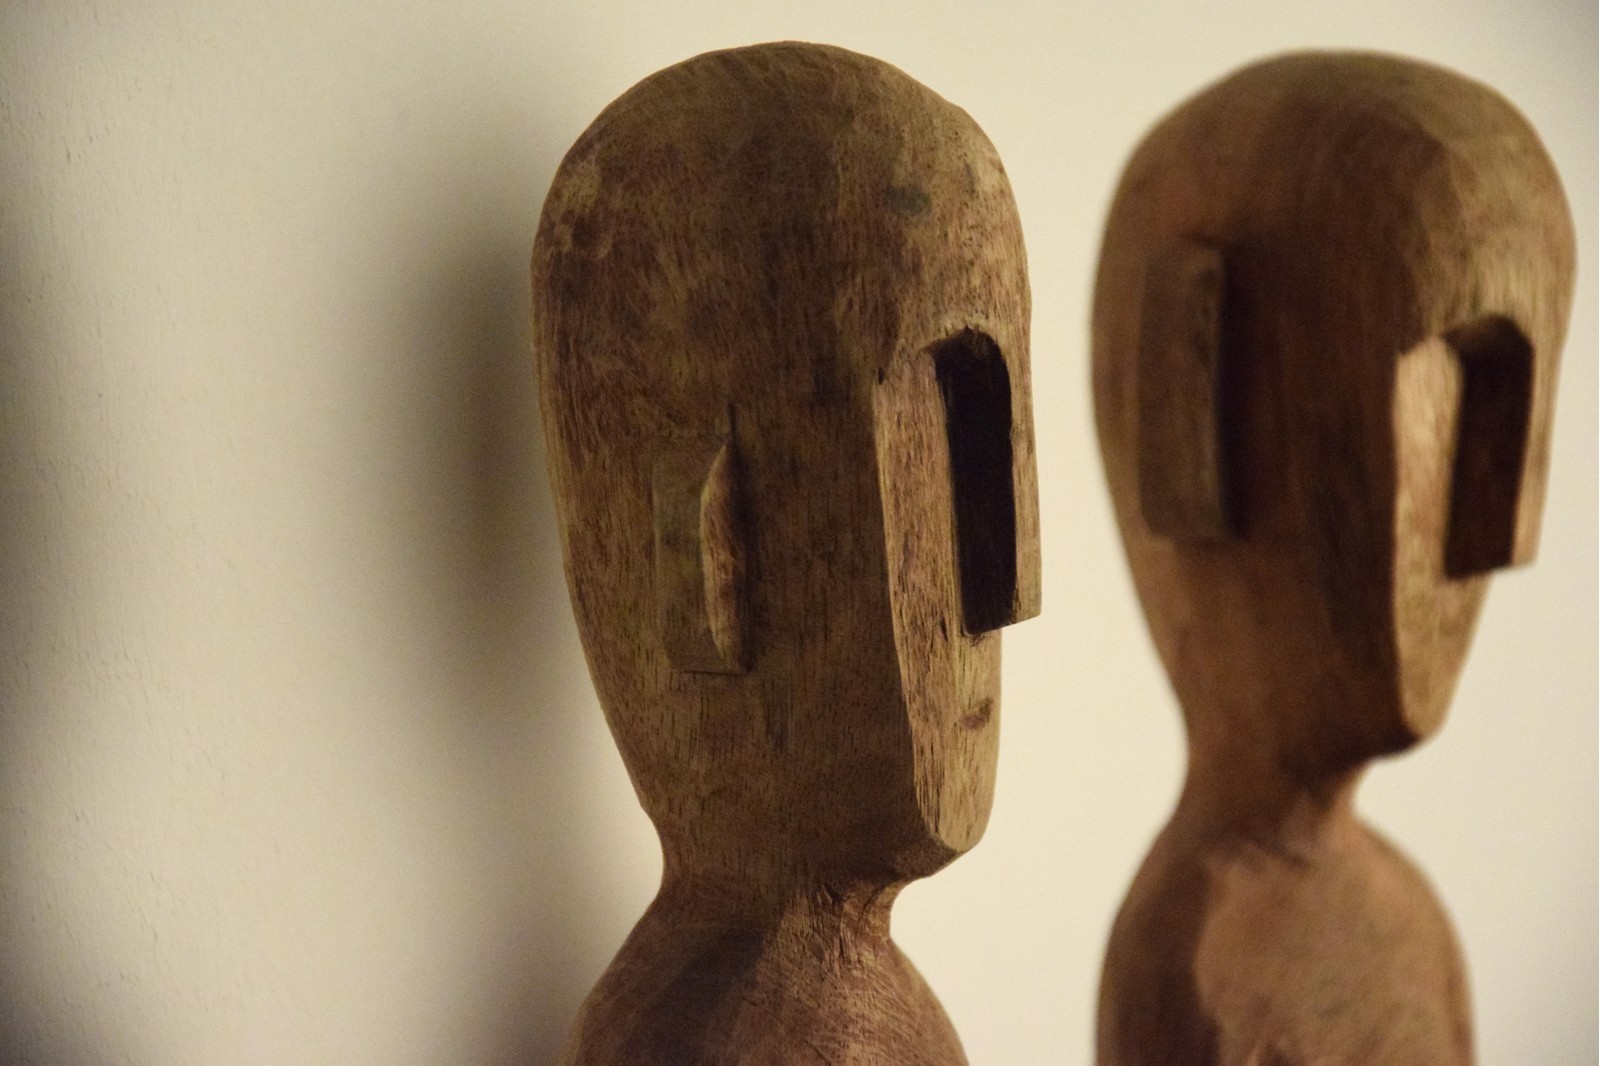 AFRICAN SCULPTURES IN NATURAL WOOD COLLECTION